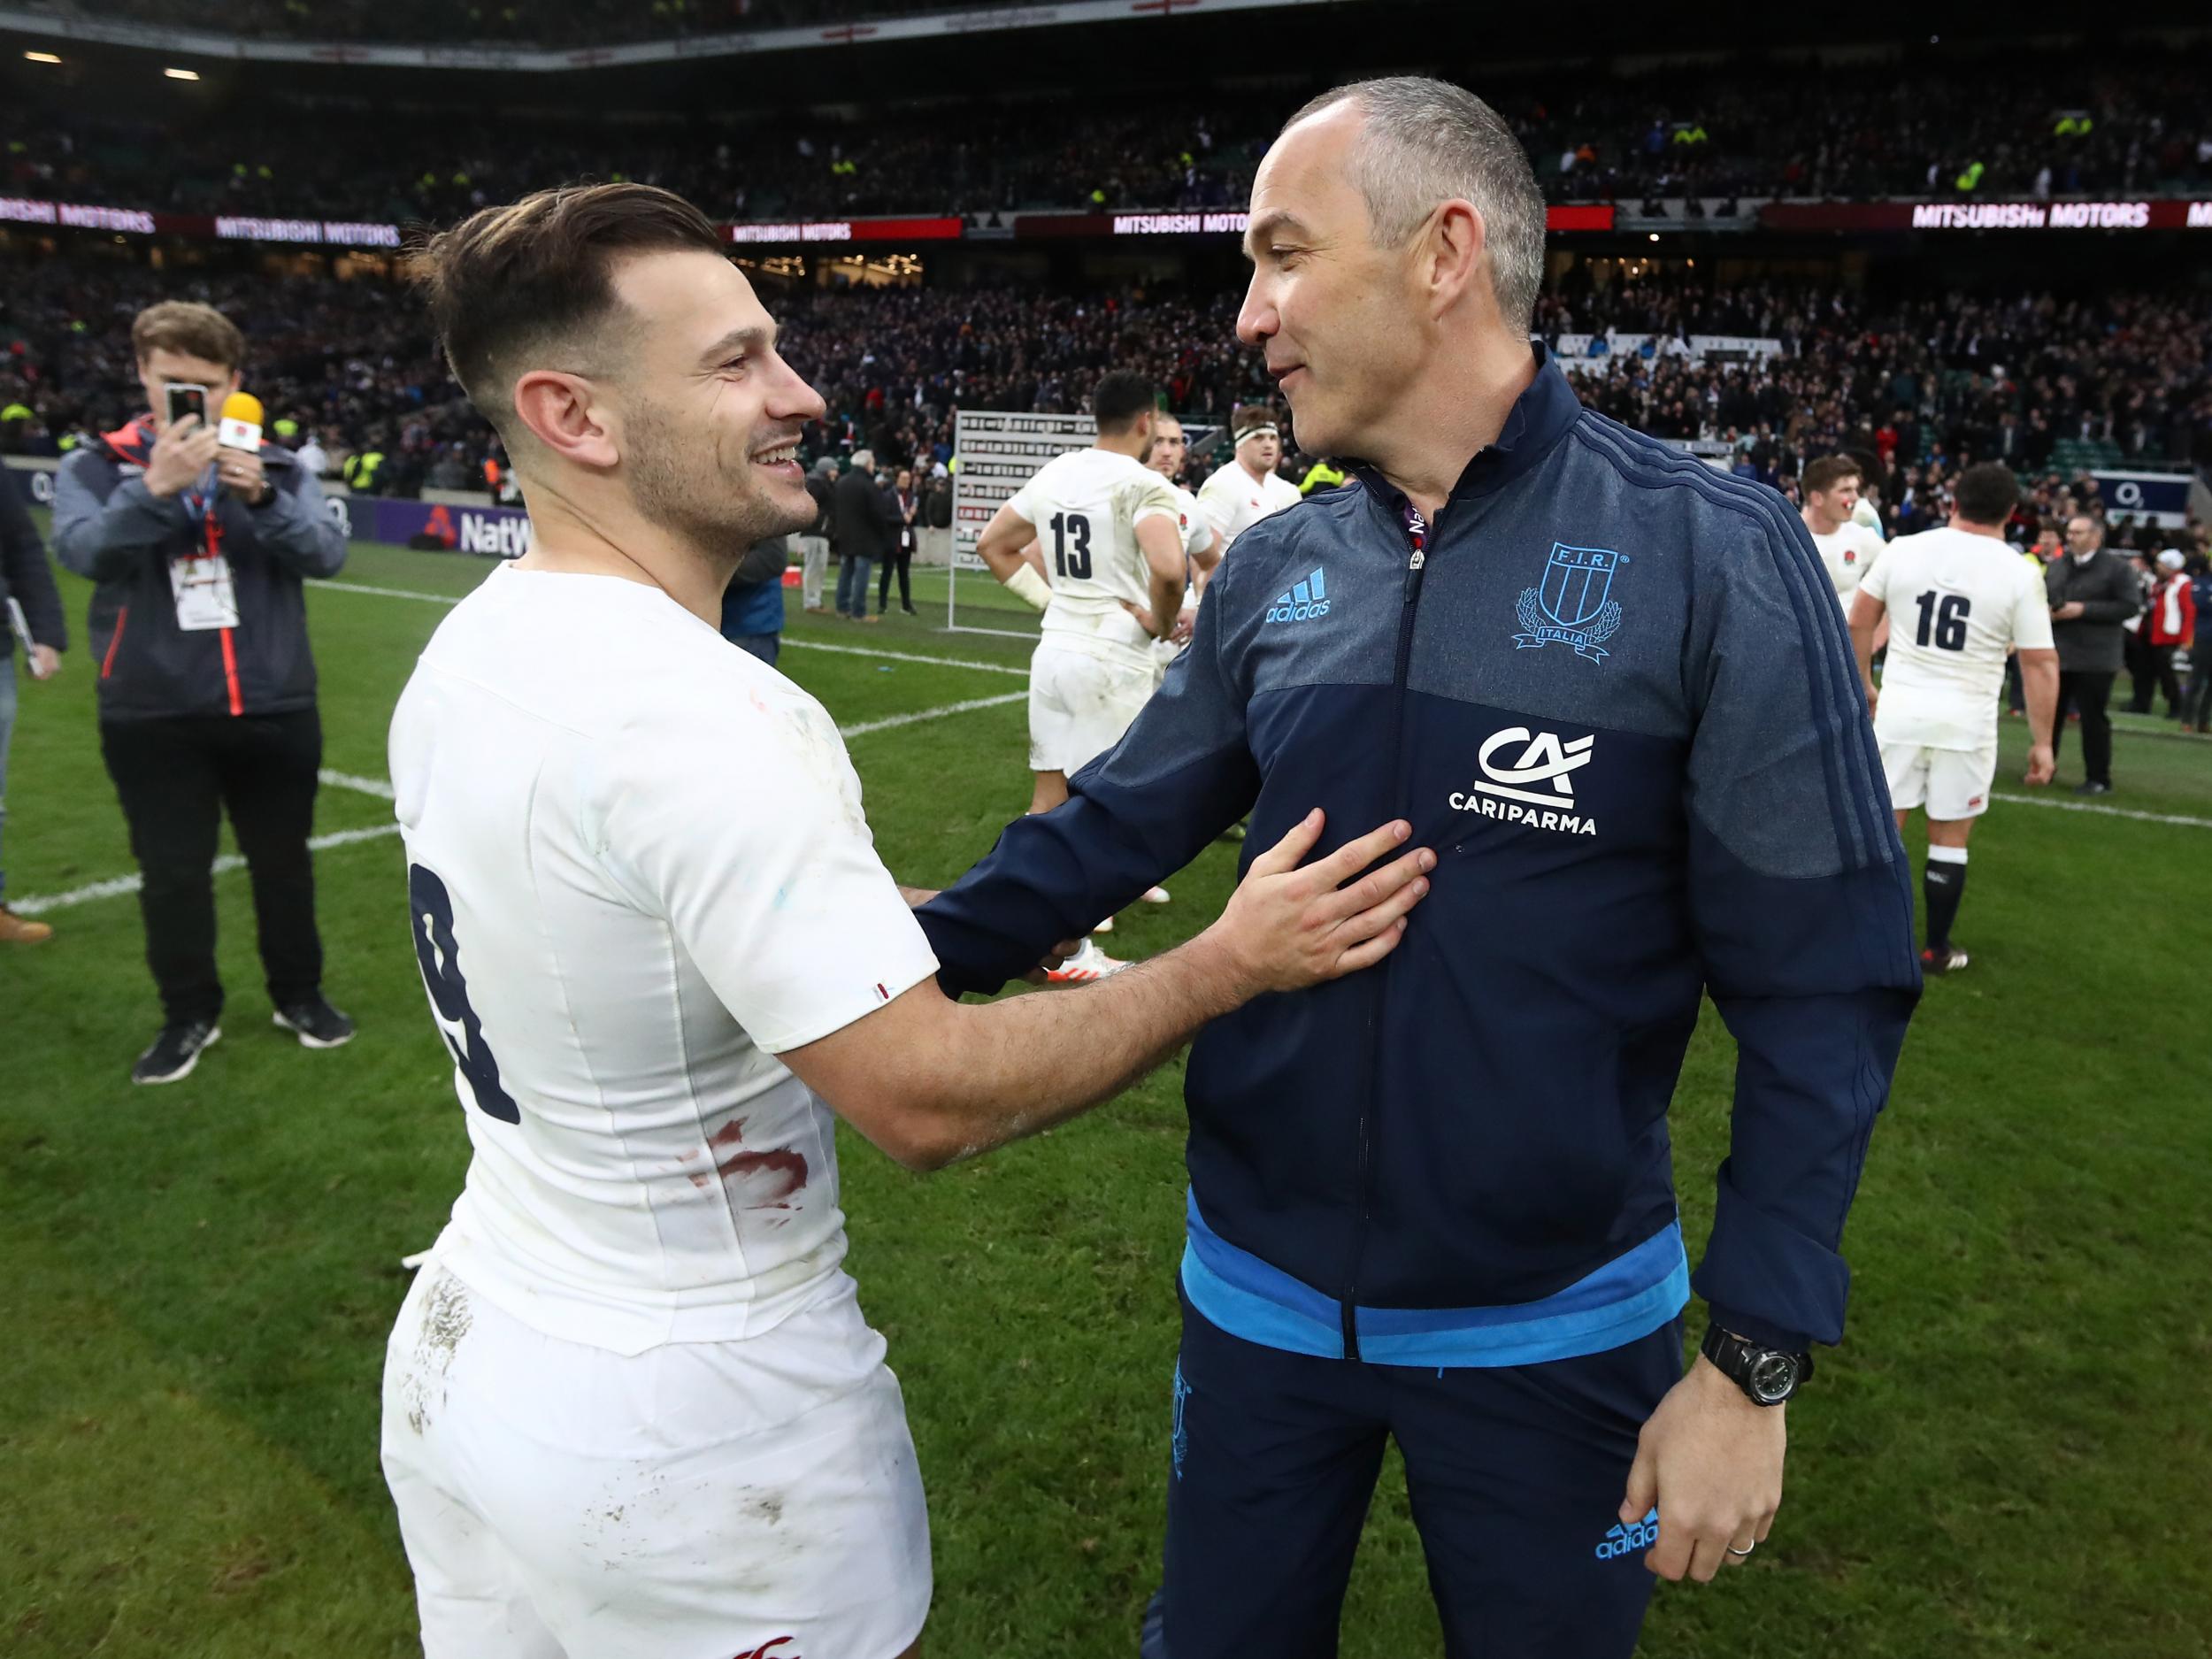 O'Shea with England's Danny Care after the final whistle